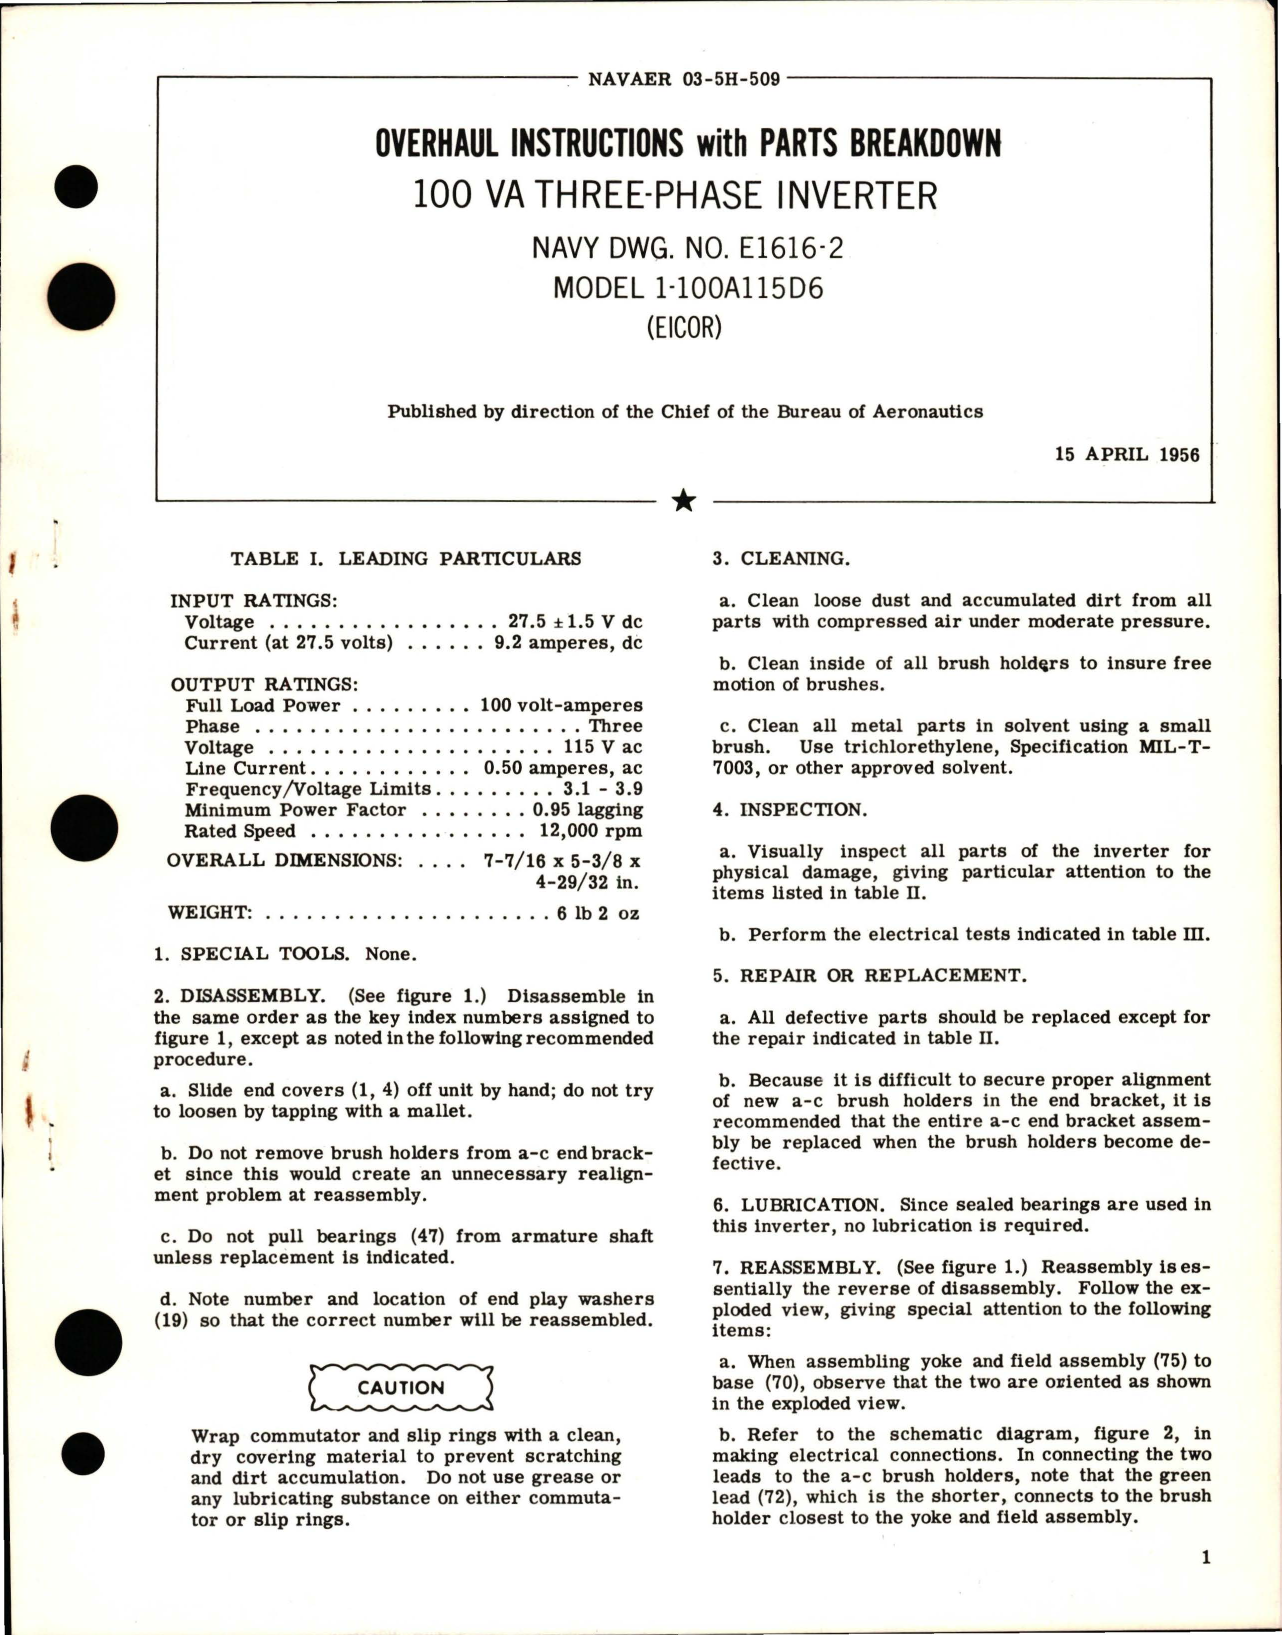 Sample page 1 from AirCorps Library document: Overhaul Instructions with Parts Breakdown for Inverter - 100 VA Three-Phase - Model 1-100A115D6